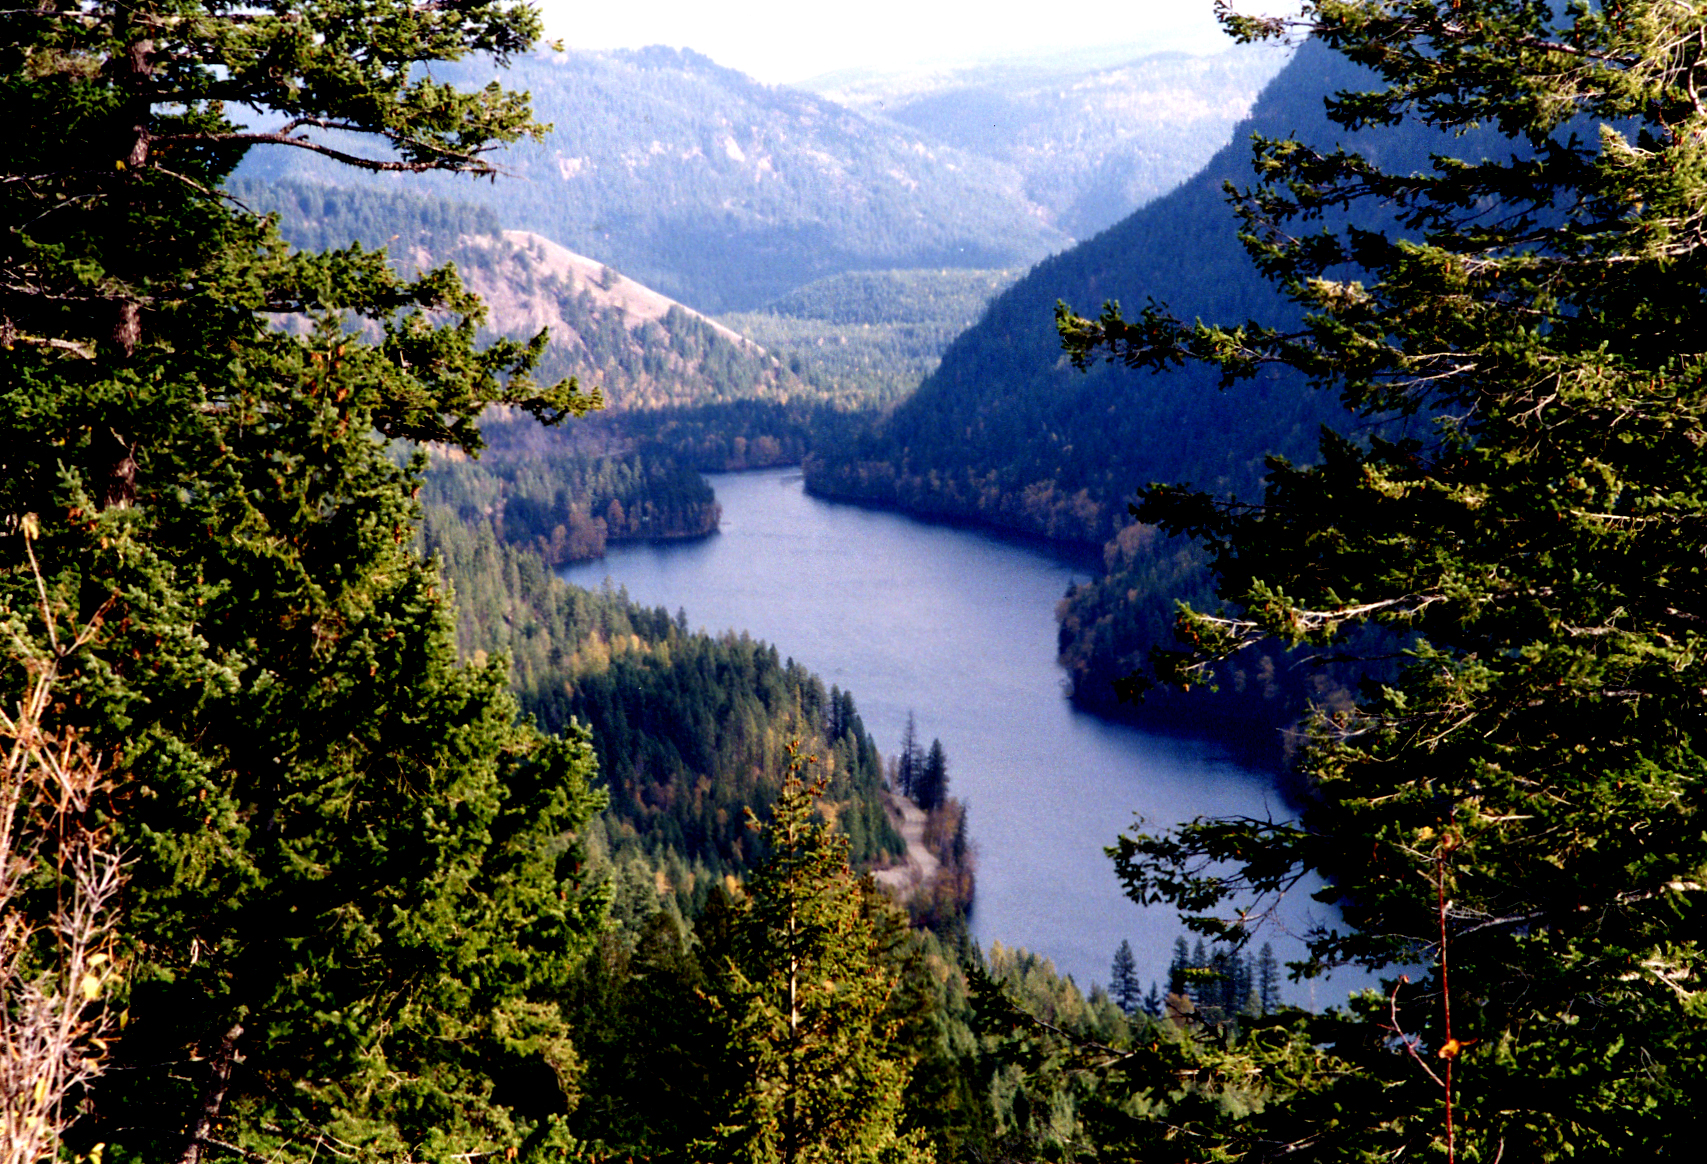 This photo is of Echo Lake in British Columbia. The photo is an aerial point of view, looking down at this small lake that is surrounded by forest.